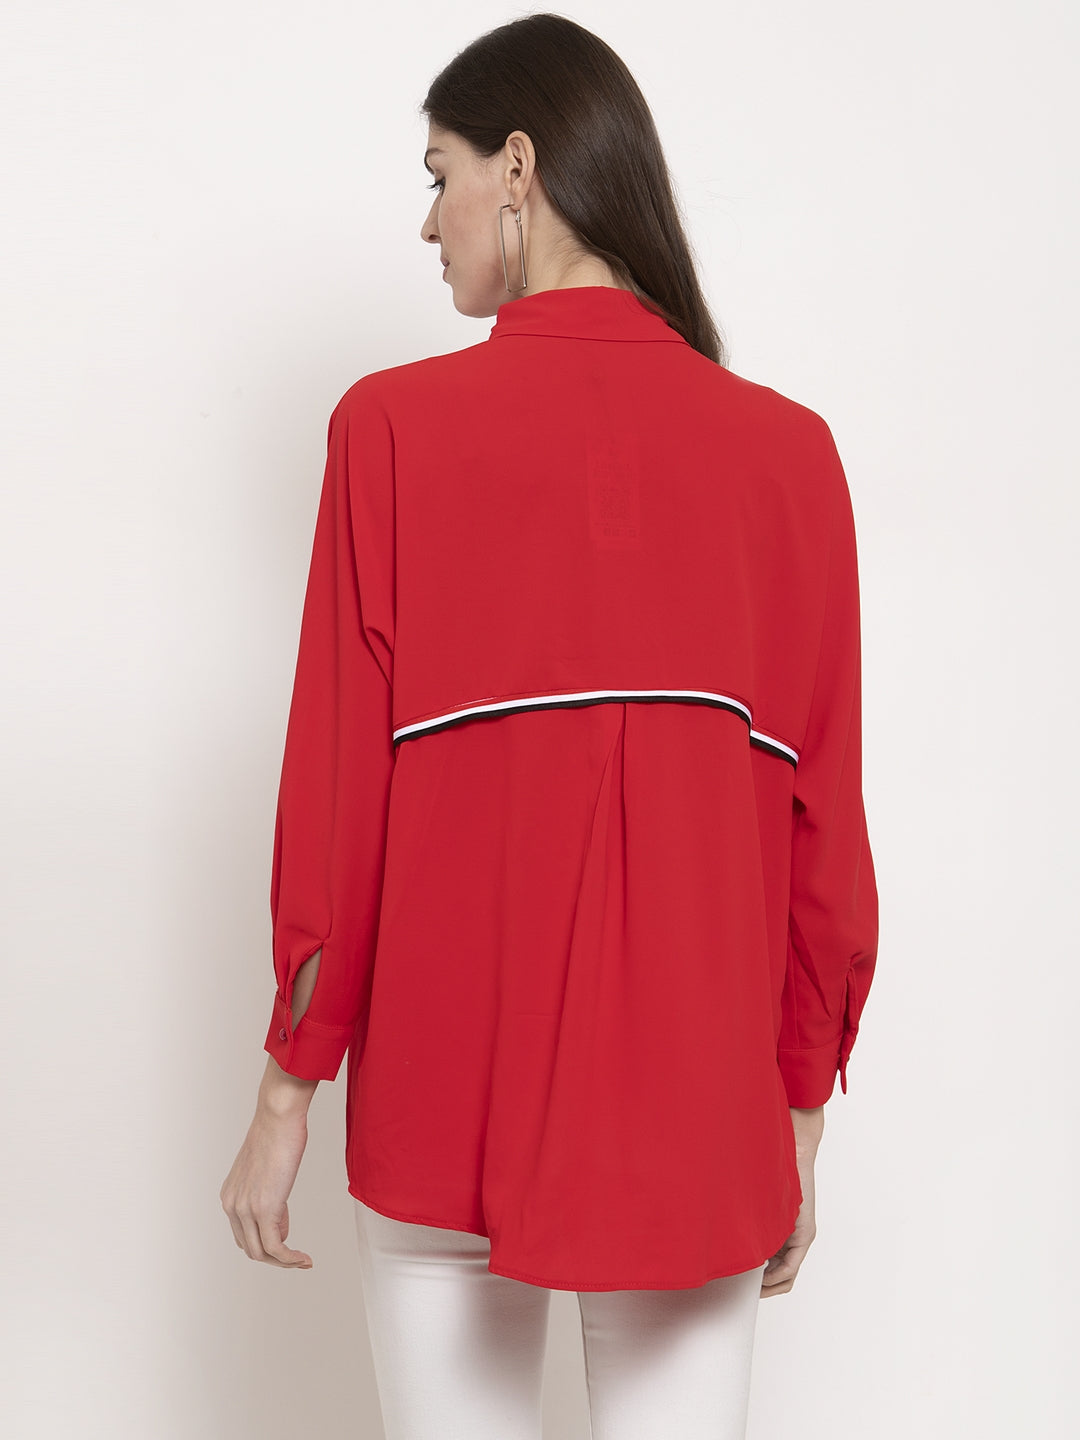 Ladies Red Solid Collared Shirt